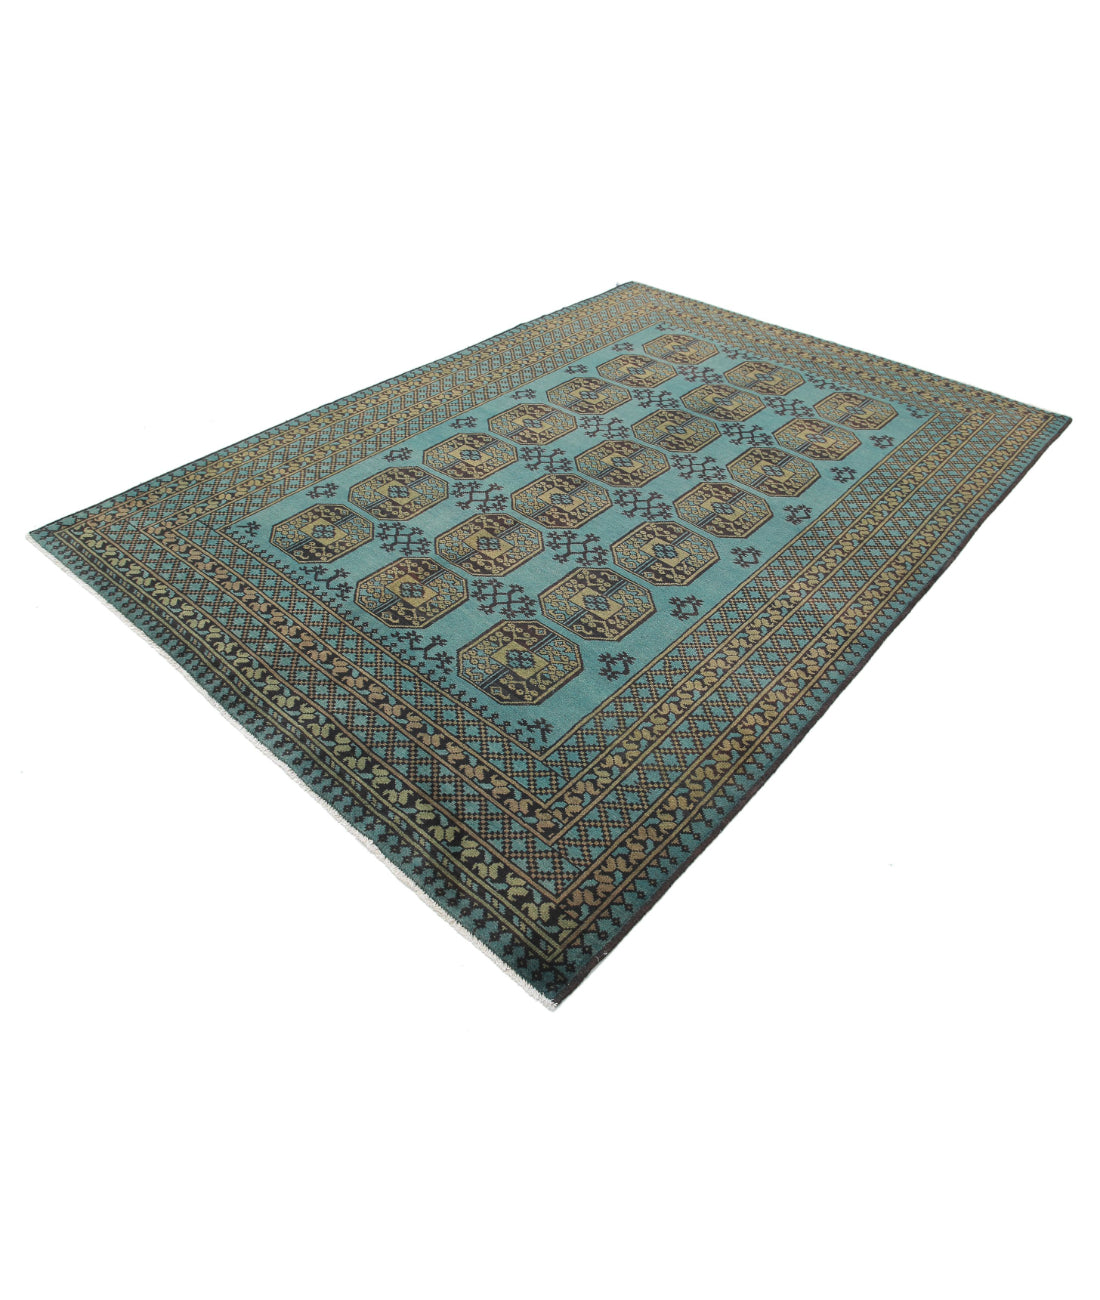 Revival 6'7'' X 9'4'' Hand-Knotted Wool Rug 6'7'' x 9'4'' (198 X 280) / Green / Tan